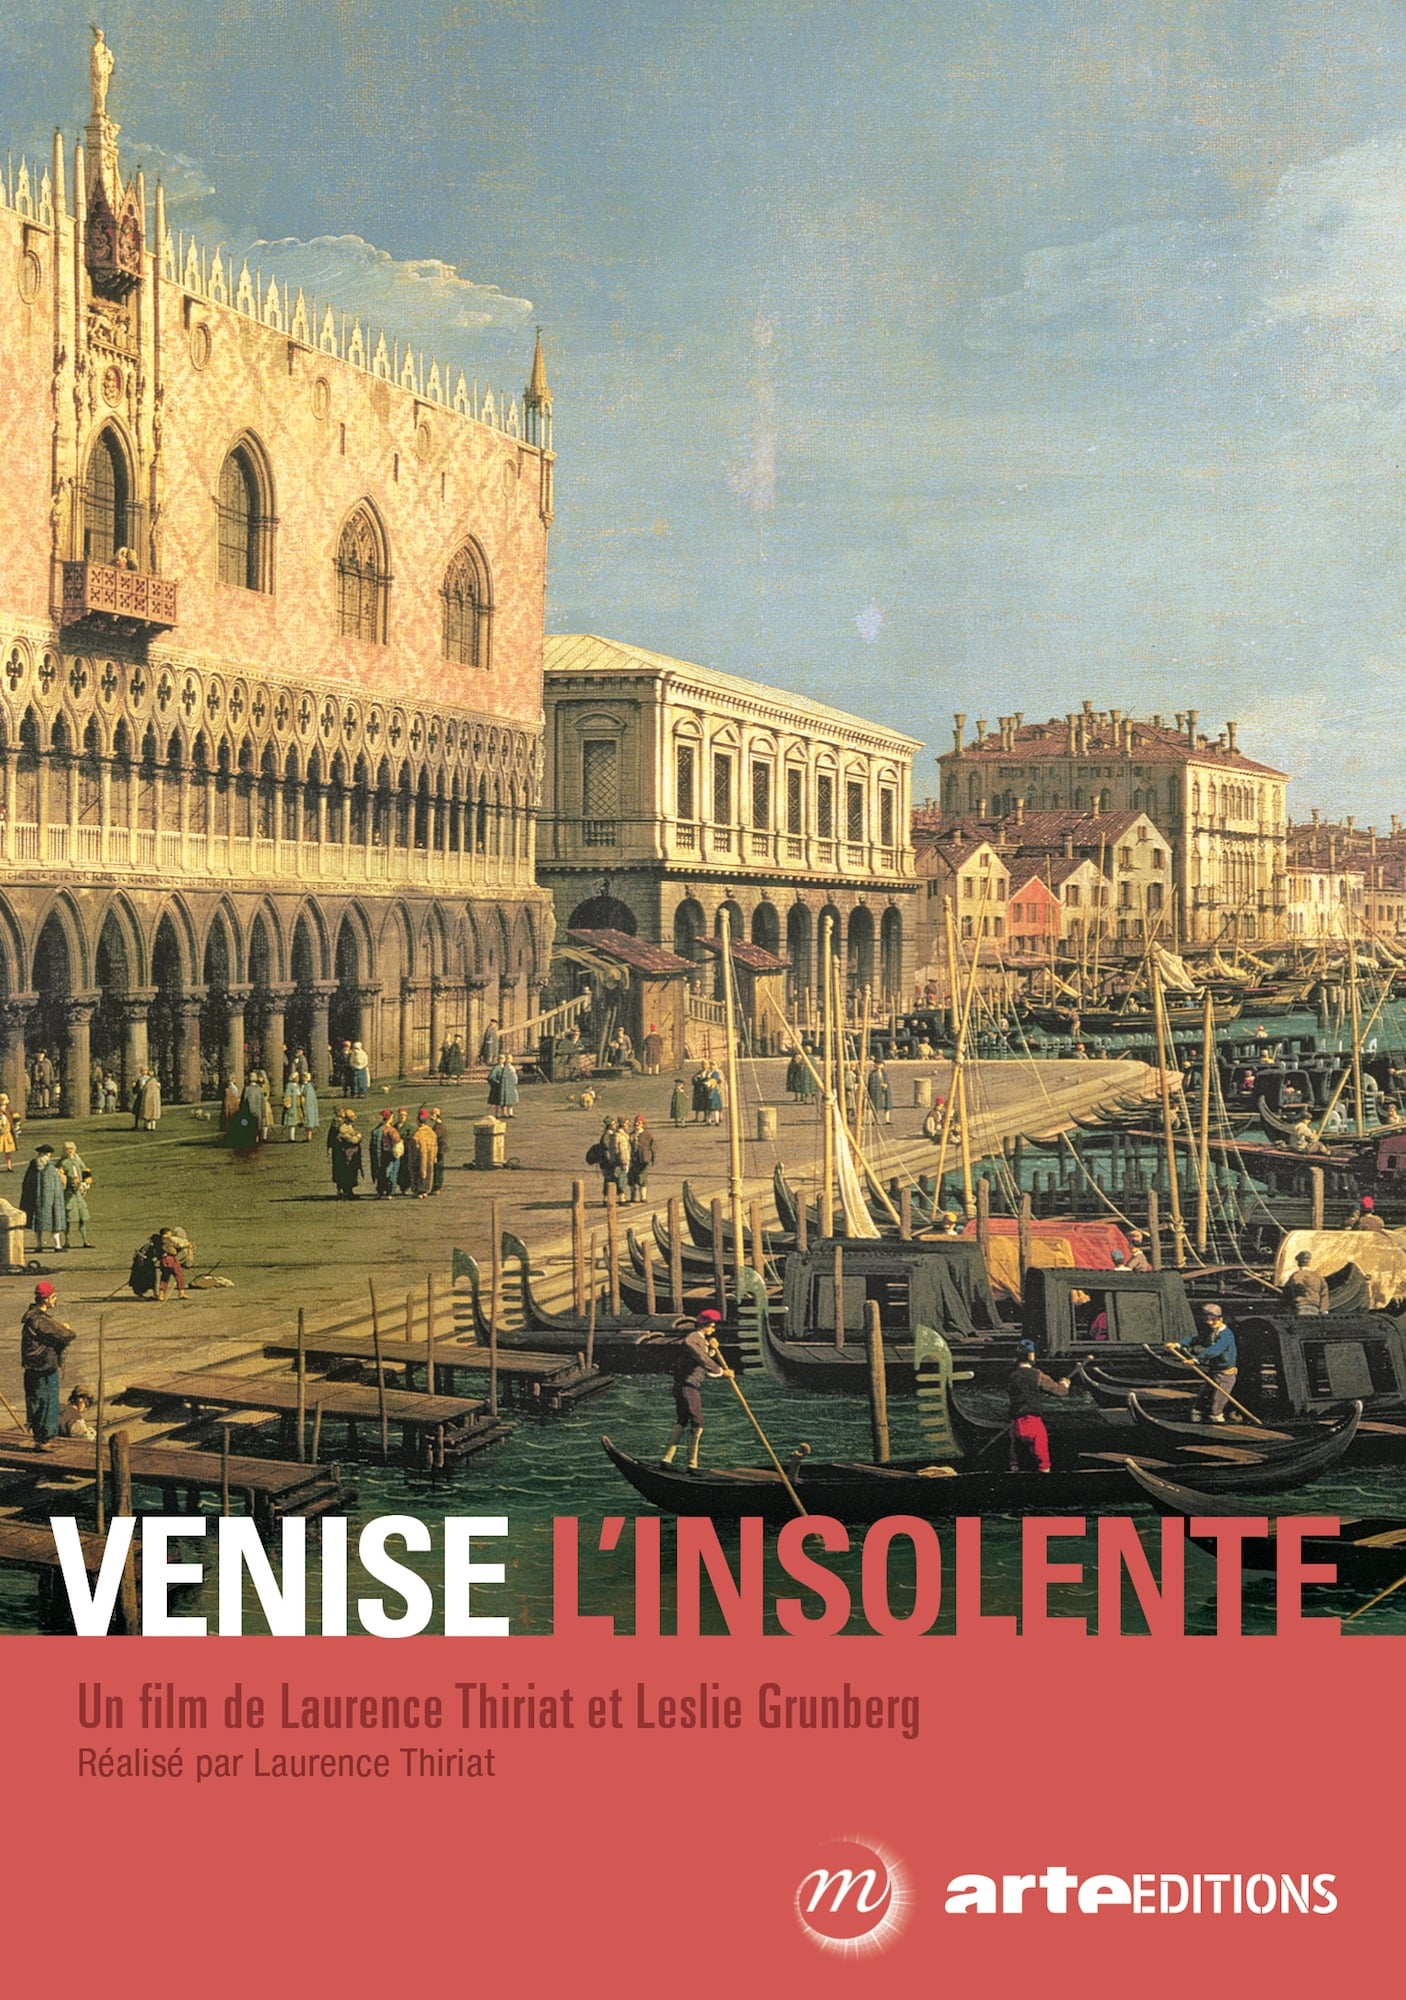 Venice: Flamboyant to the End